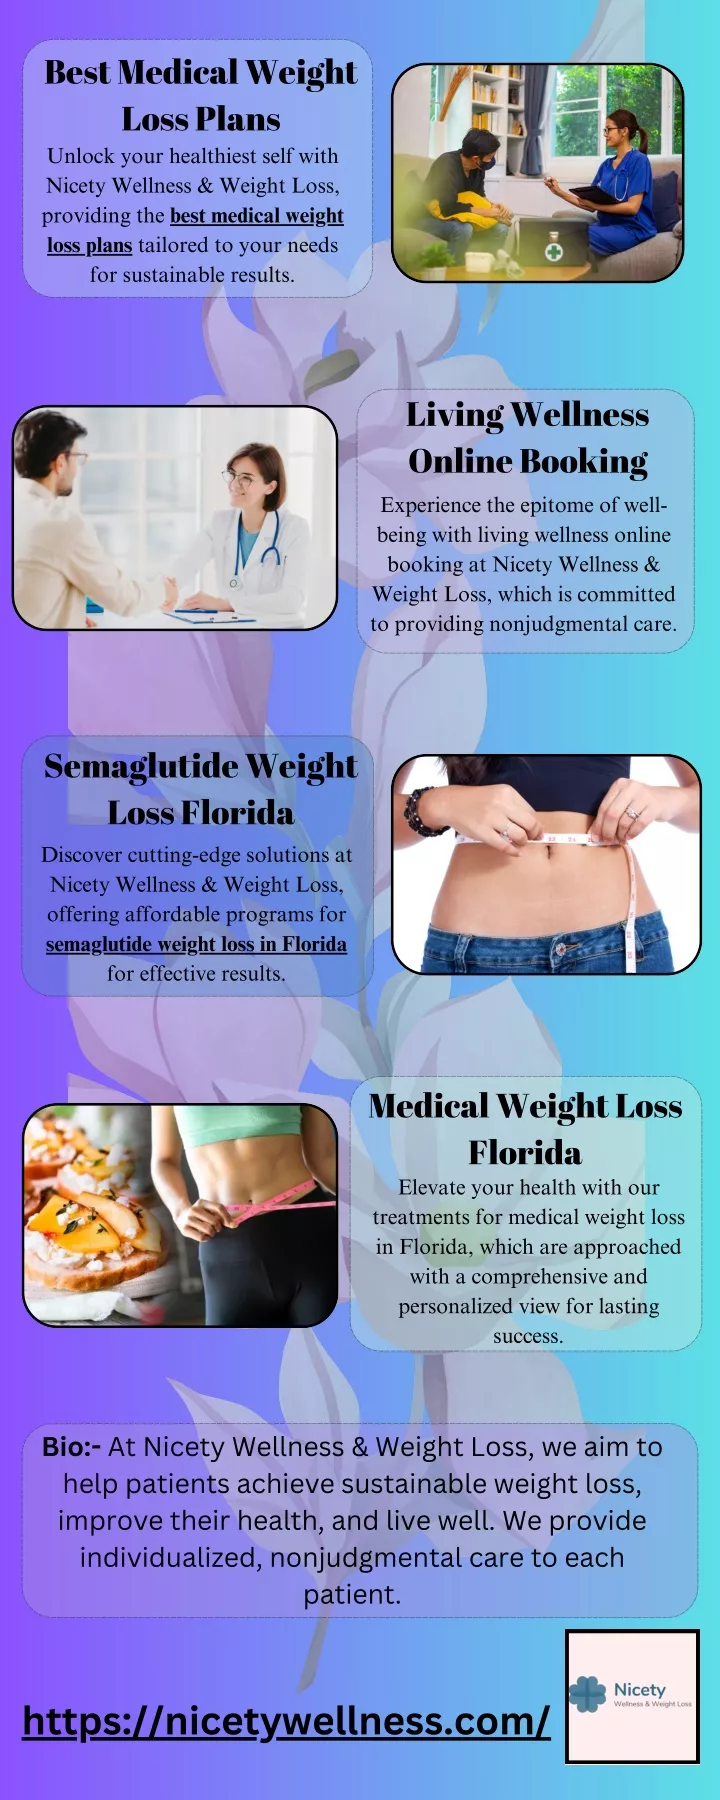 best medical weight loss plans unlock your